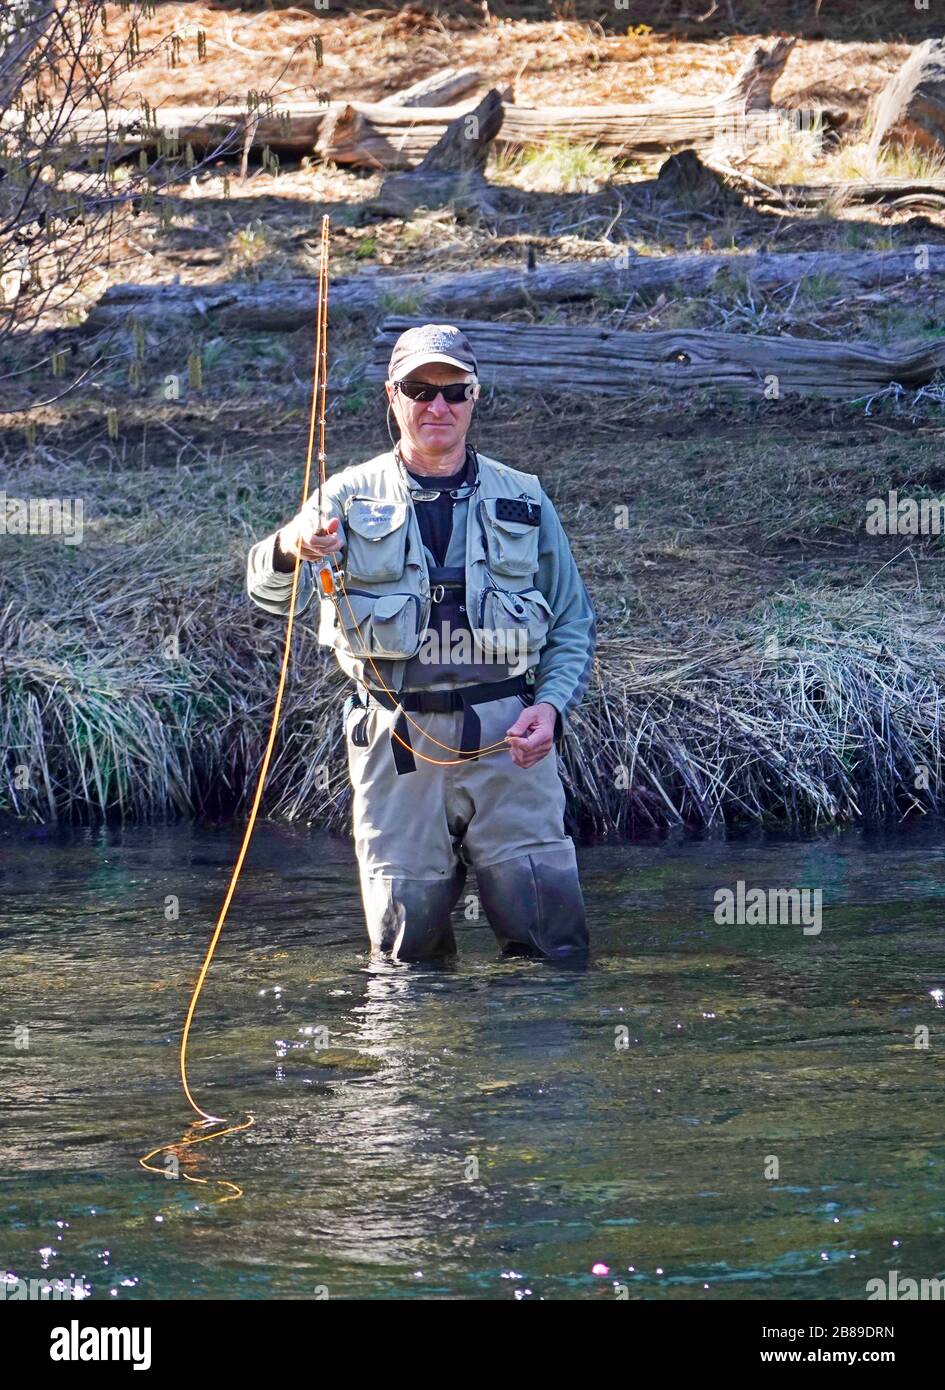 A fly fisherman fisherman casts for rainbow trout on the Metolius River in the Cascade Mountains of central Oregon. Stock Photo